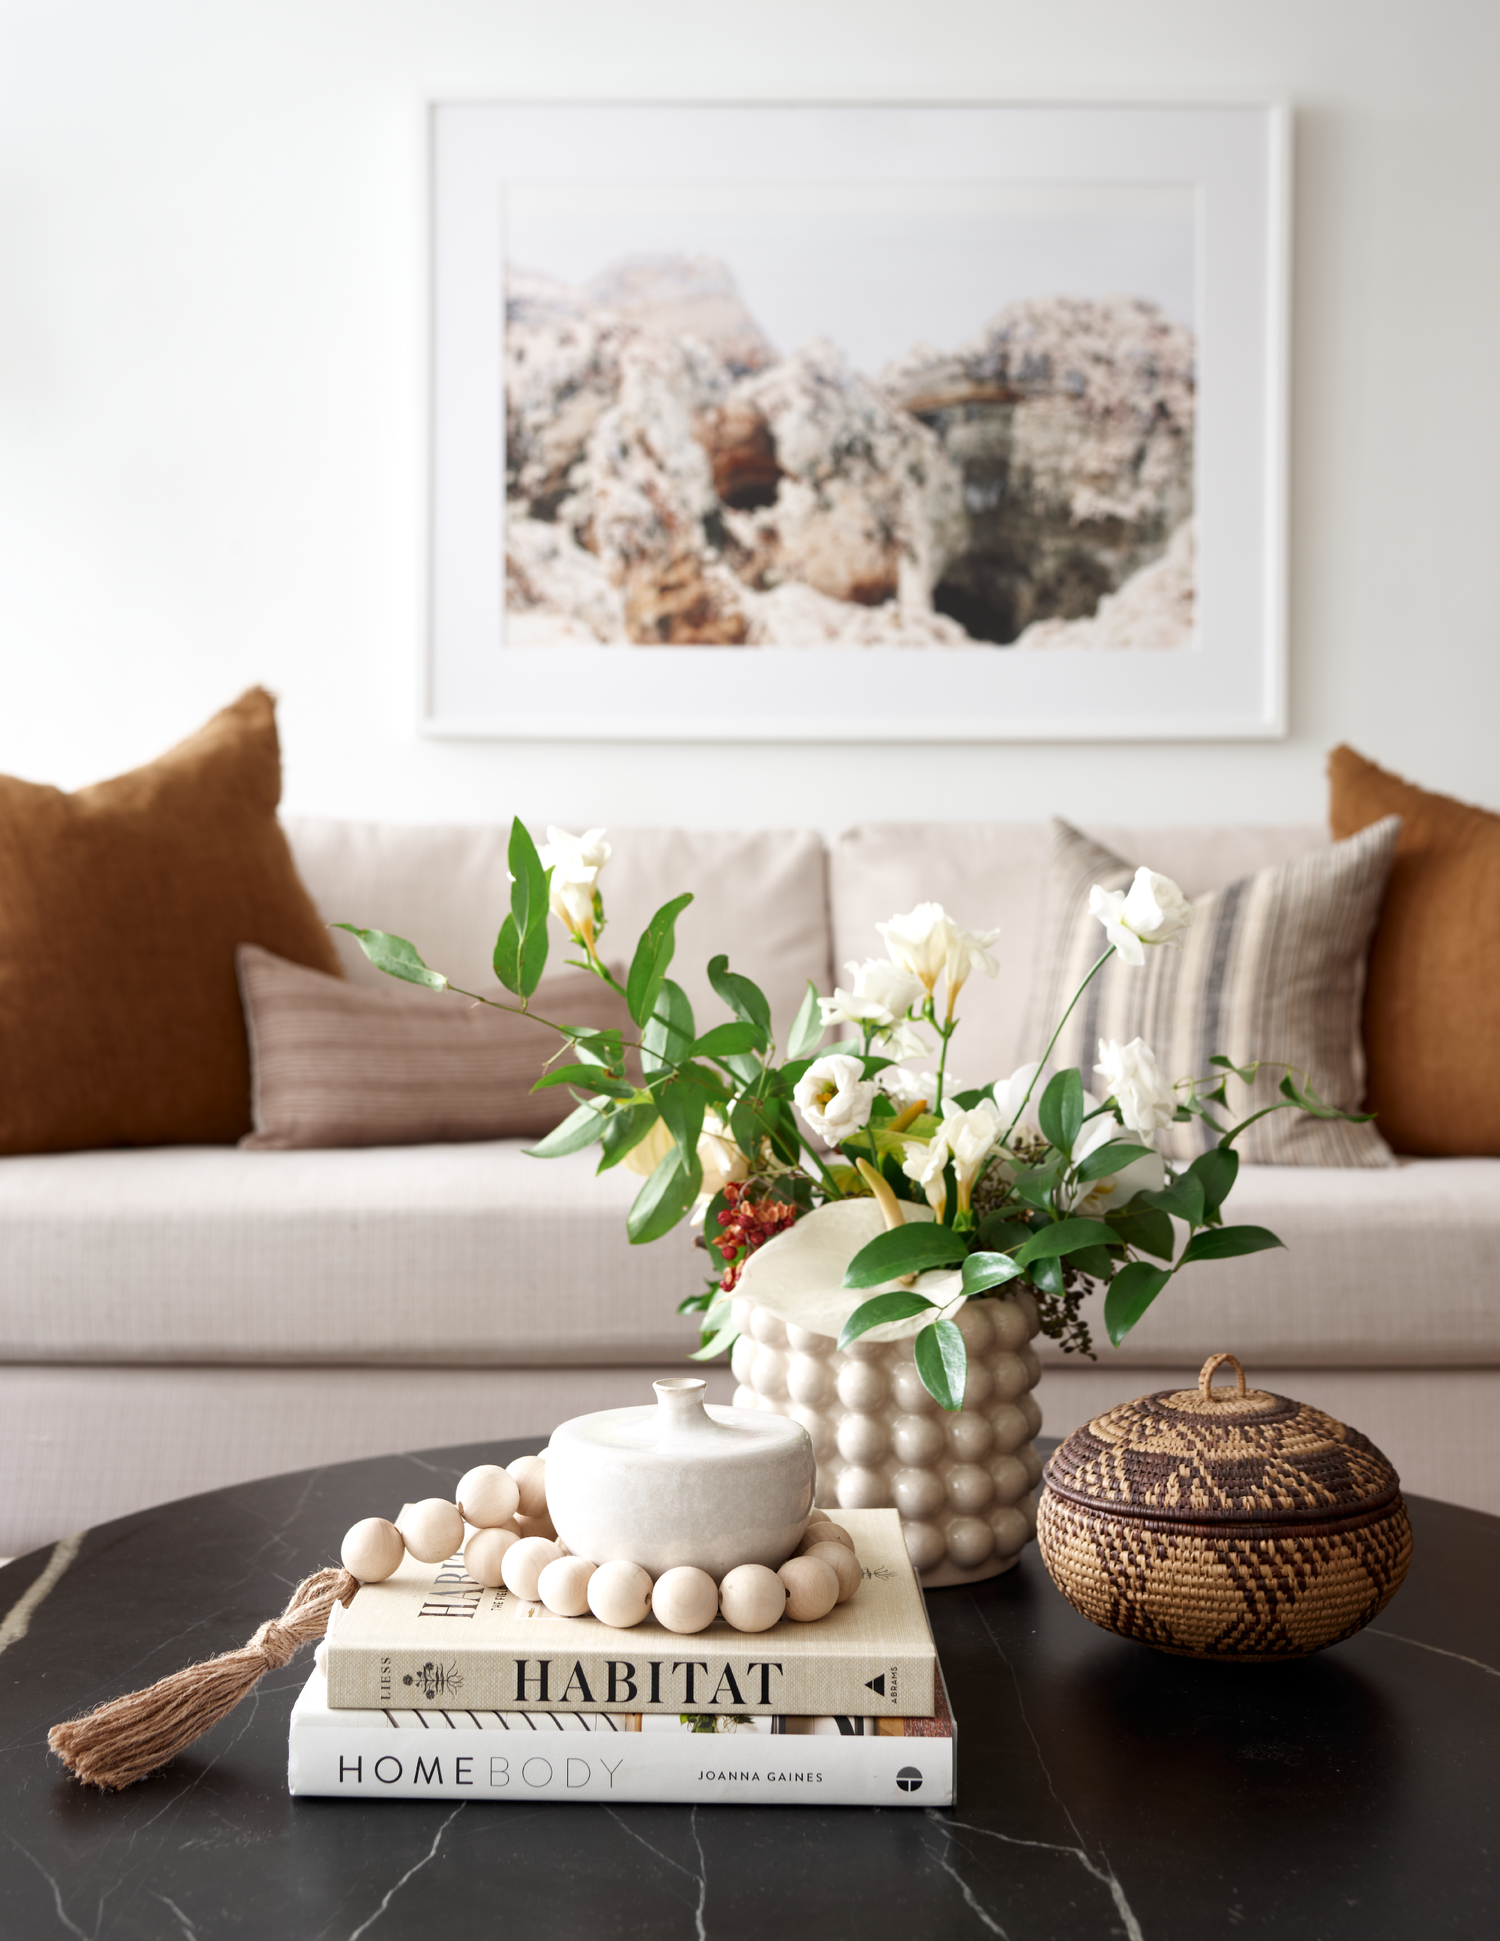 How to style a coffee table like a pro! - Laya Decor